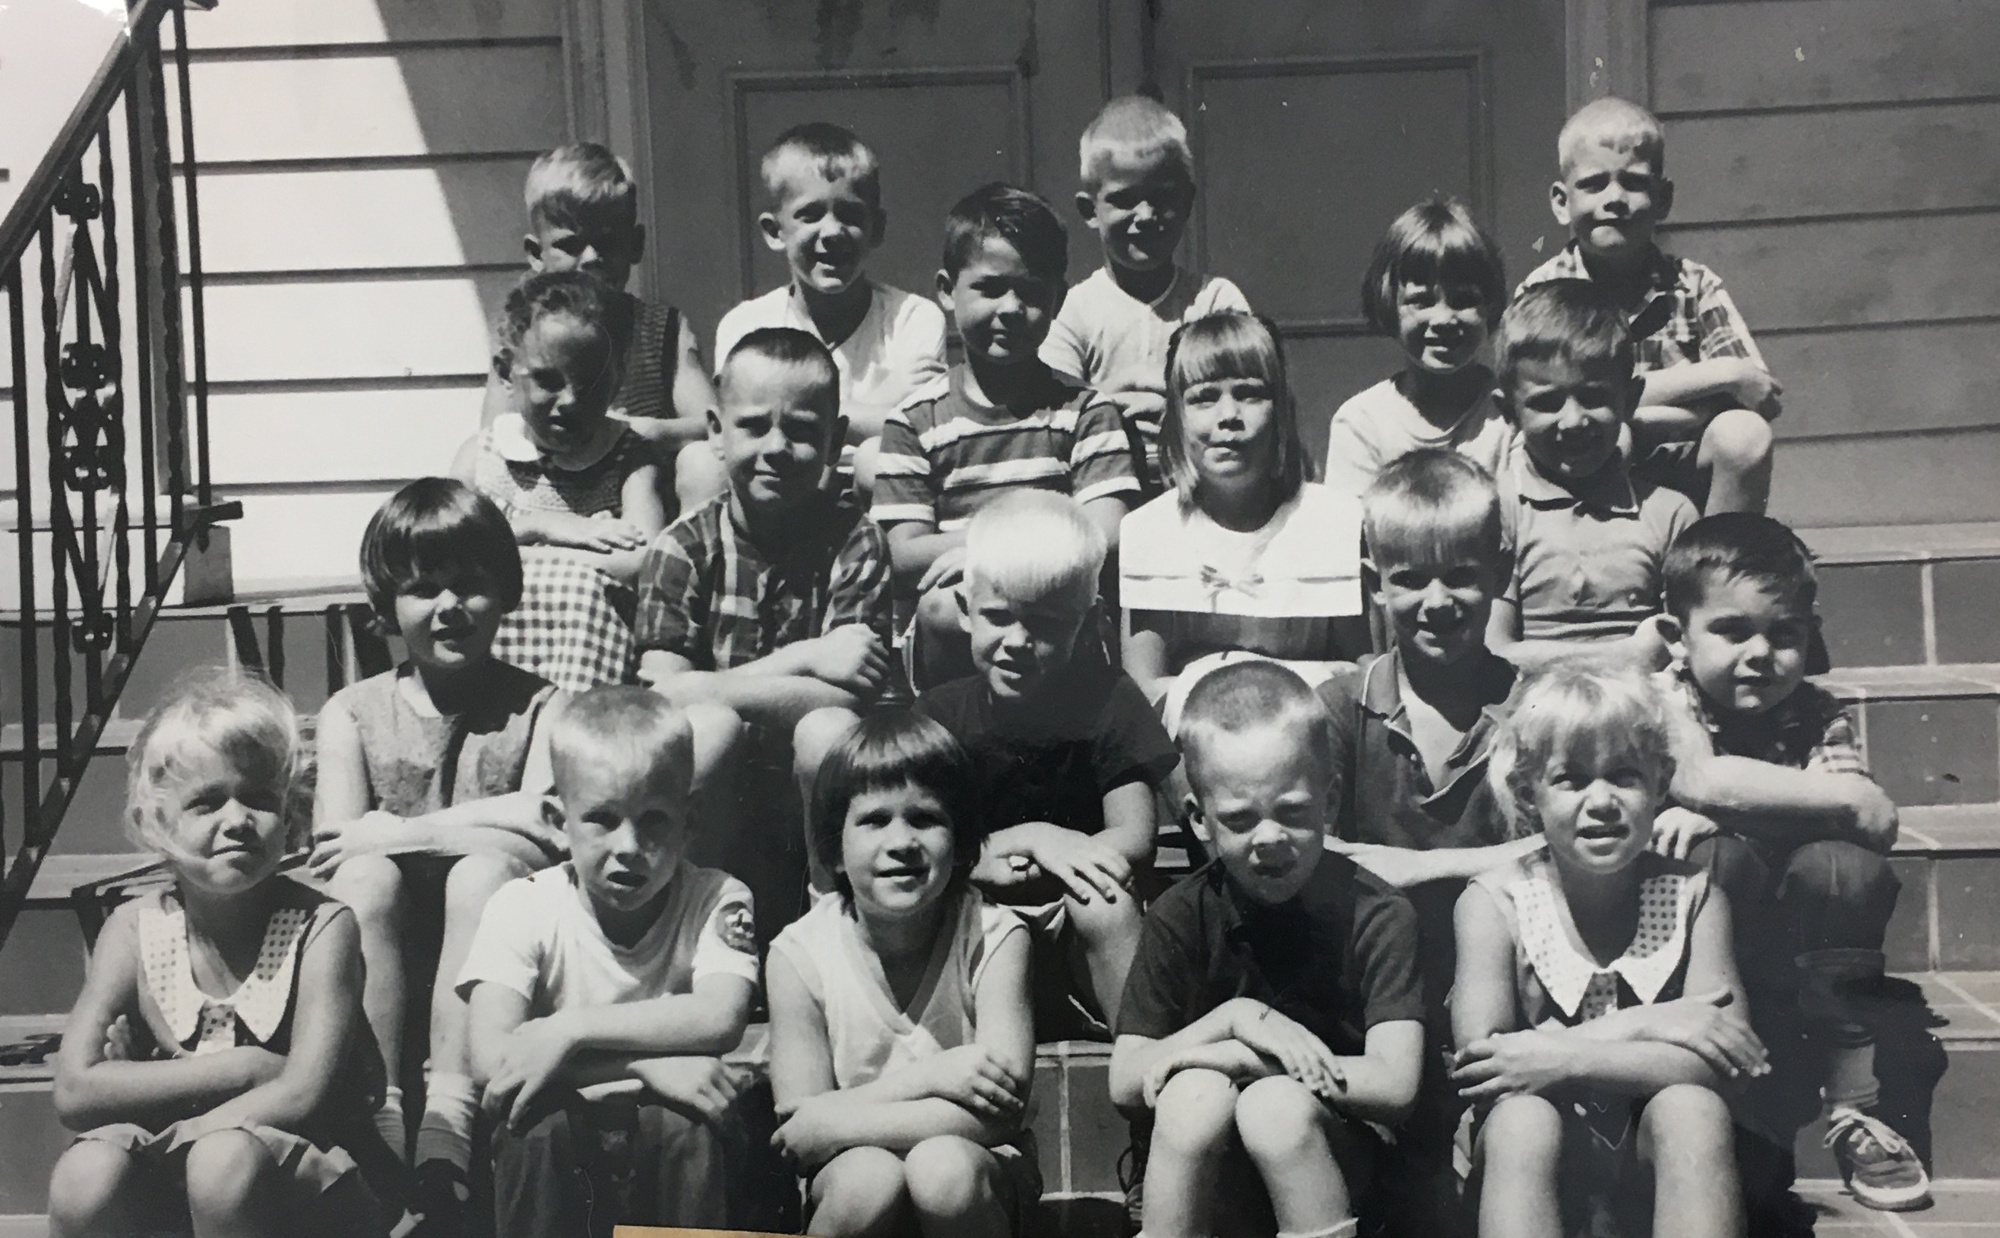 An undated scrapbook photo shows the kindergarten graduates of one of the earliest classes in Windermere Union Church's early-education program.